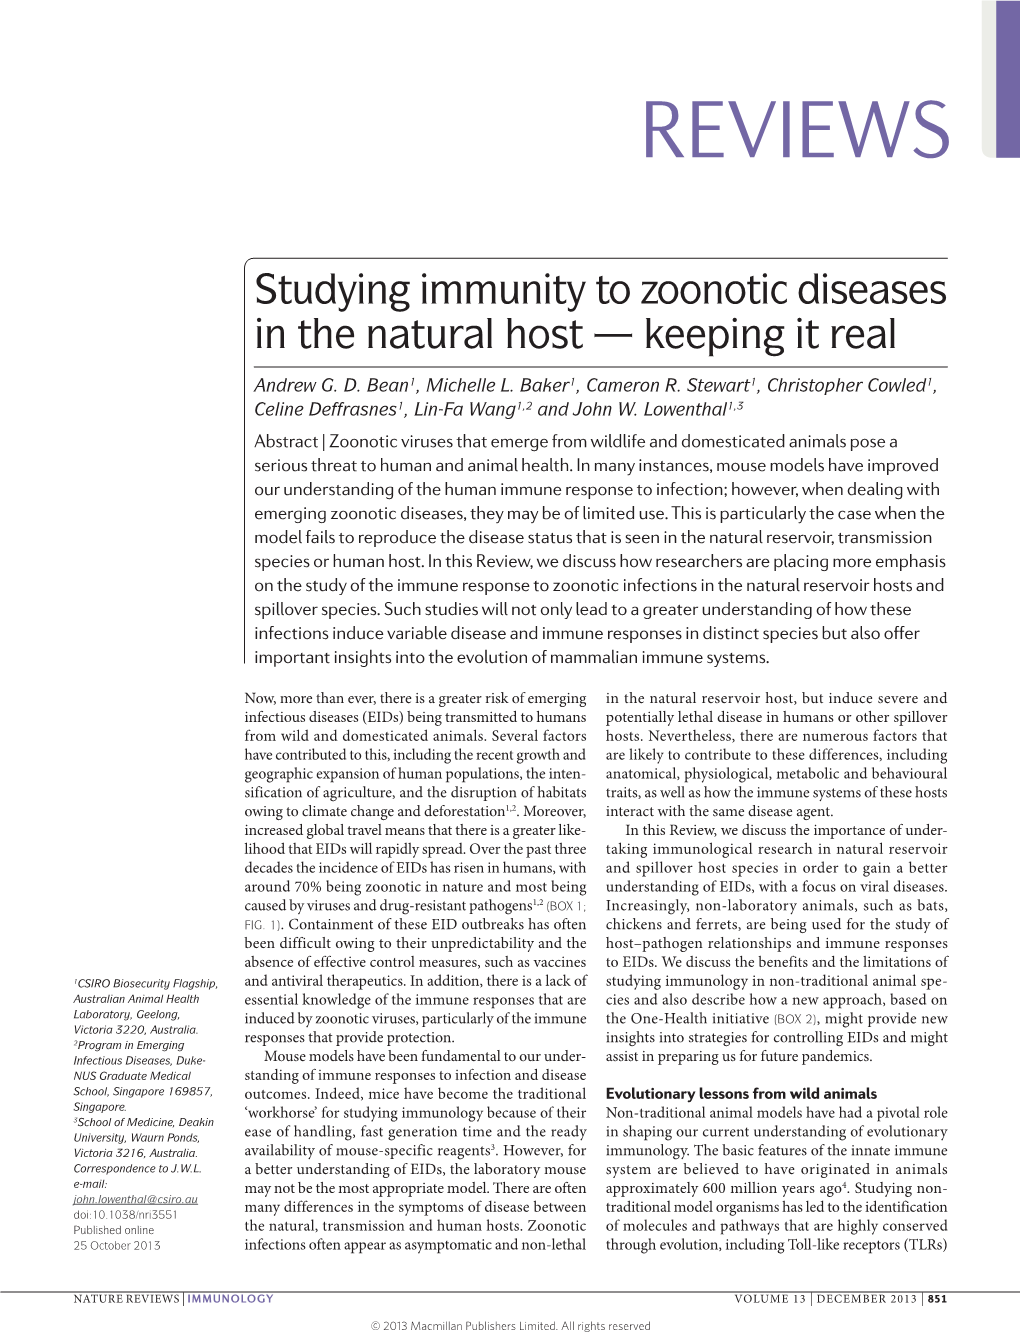 Studying Immunity to Zoonotic Diseases in the Natural Host — Keeping It Real